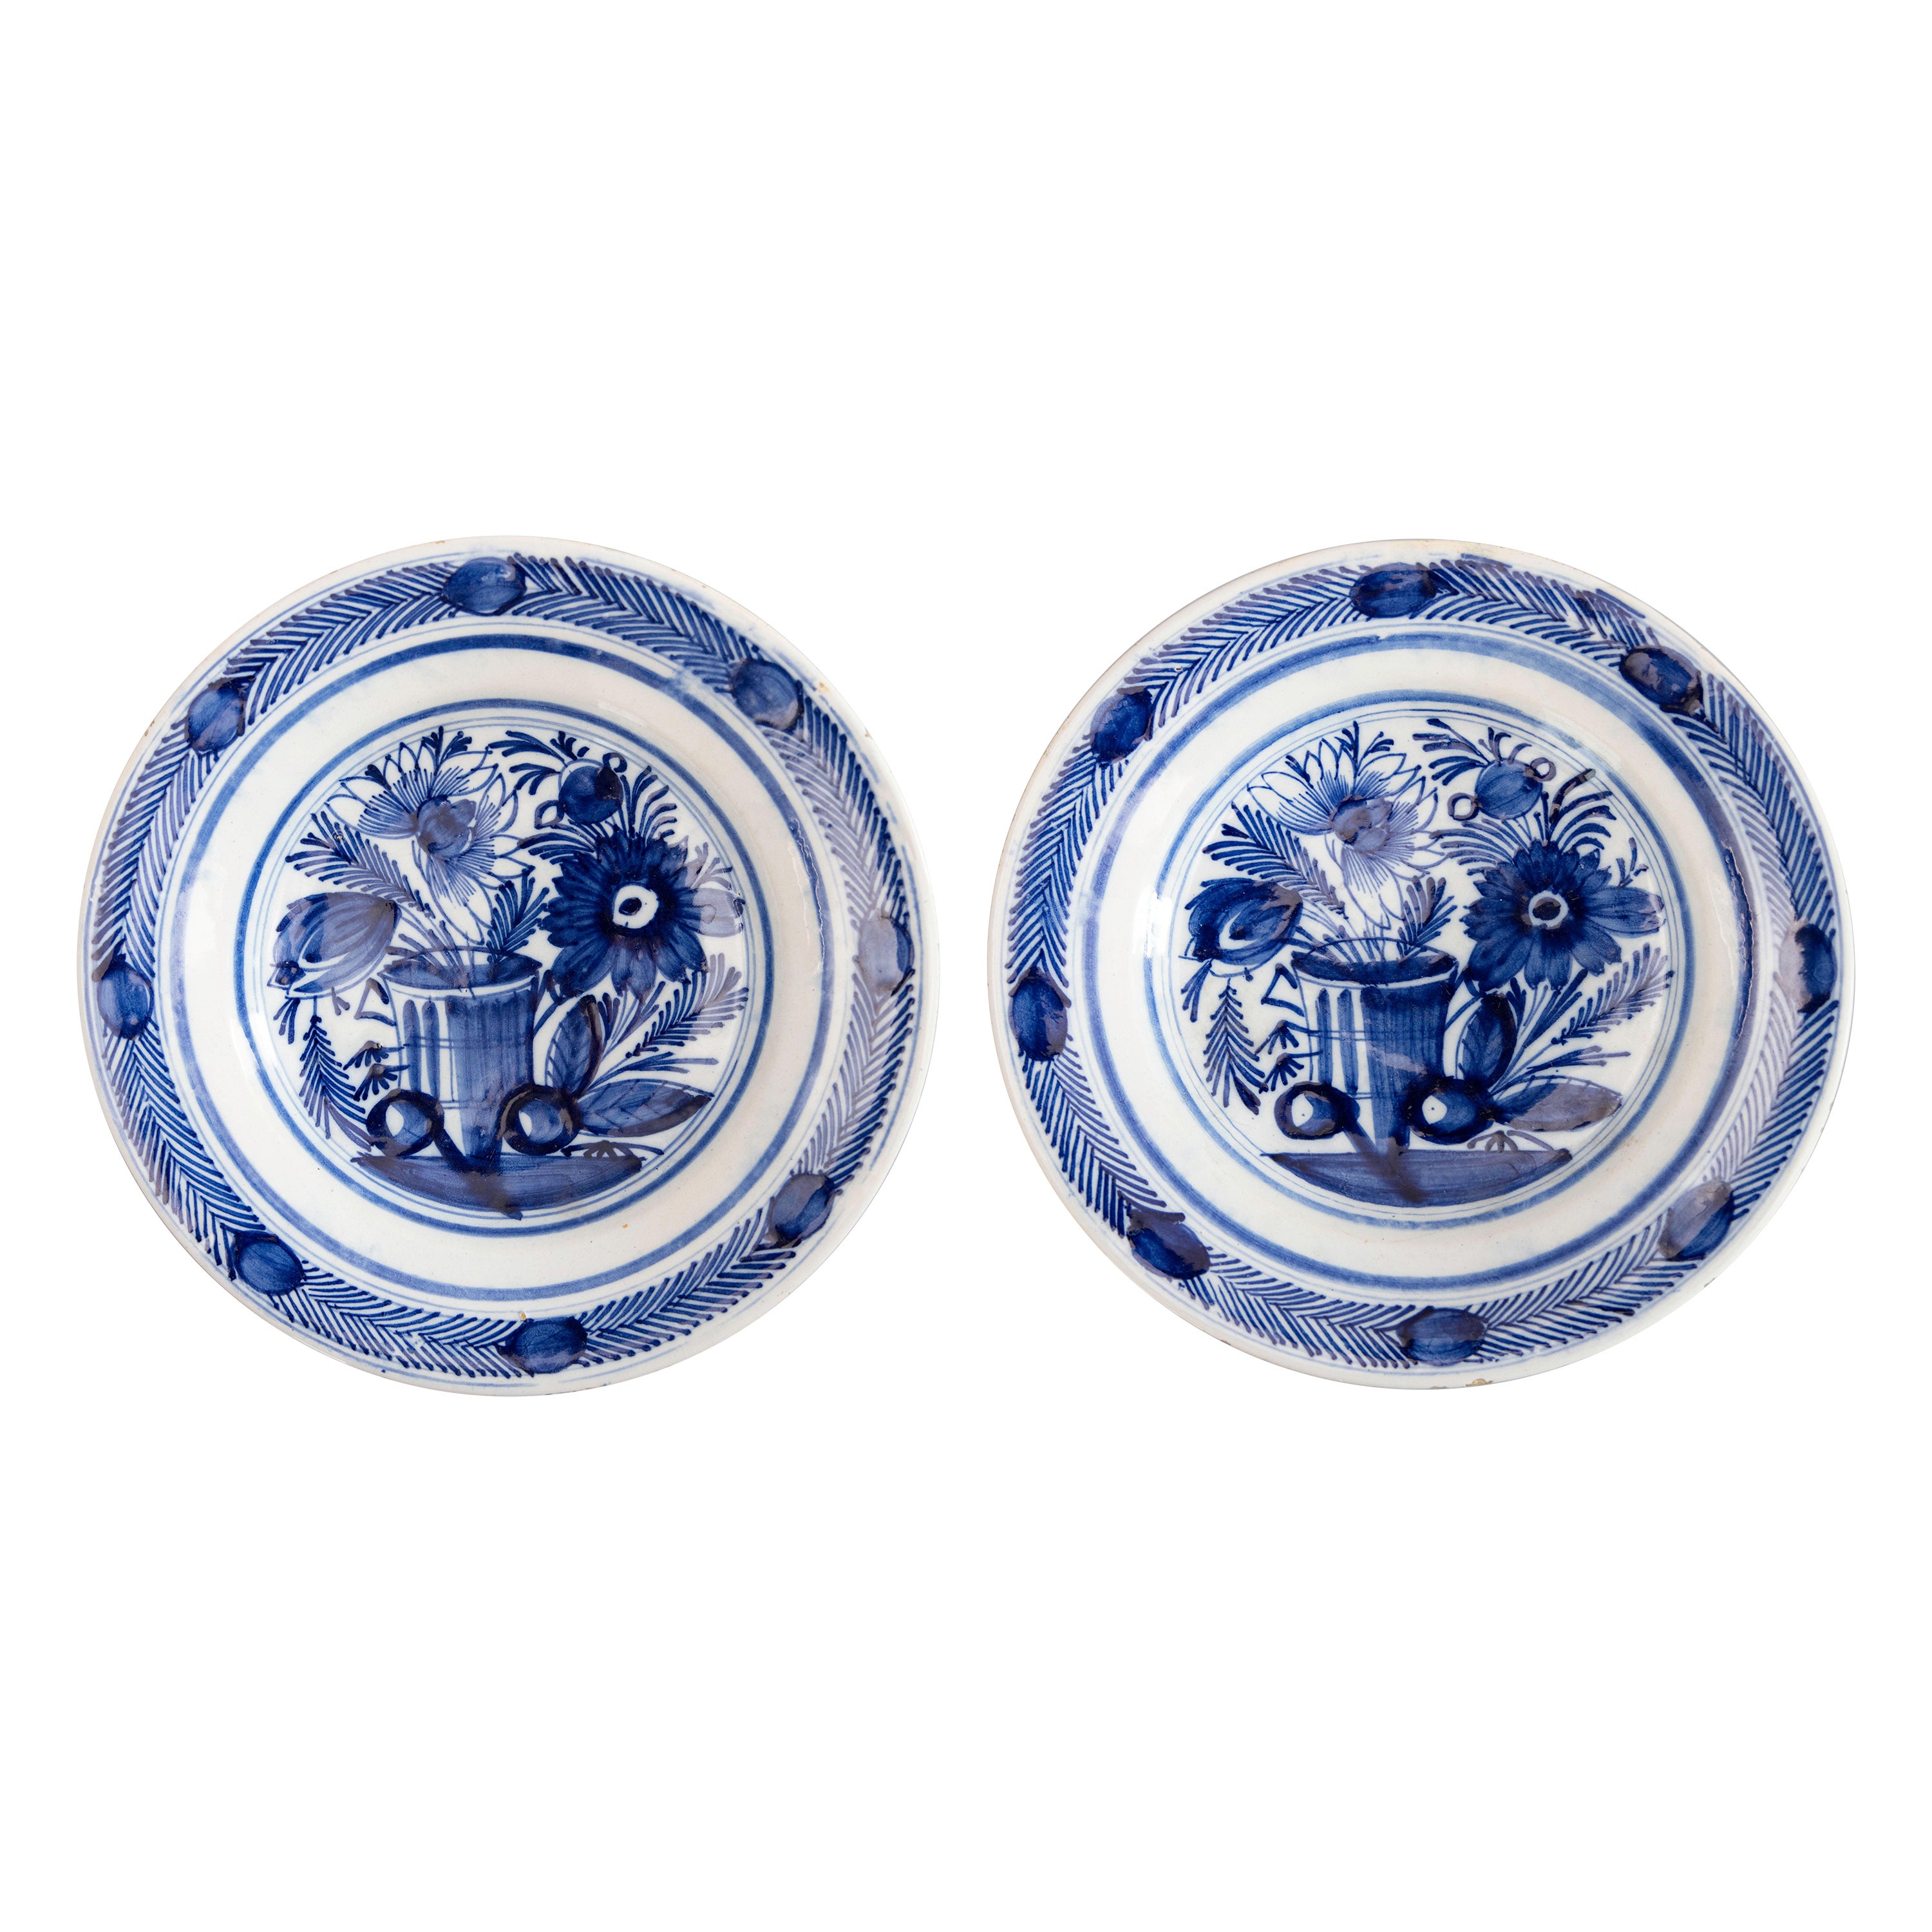 Pair of 18th Century Dutch Delft Faience Floral Plates For Sale